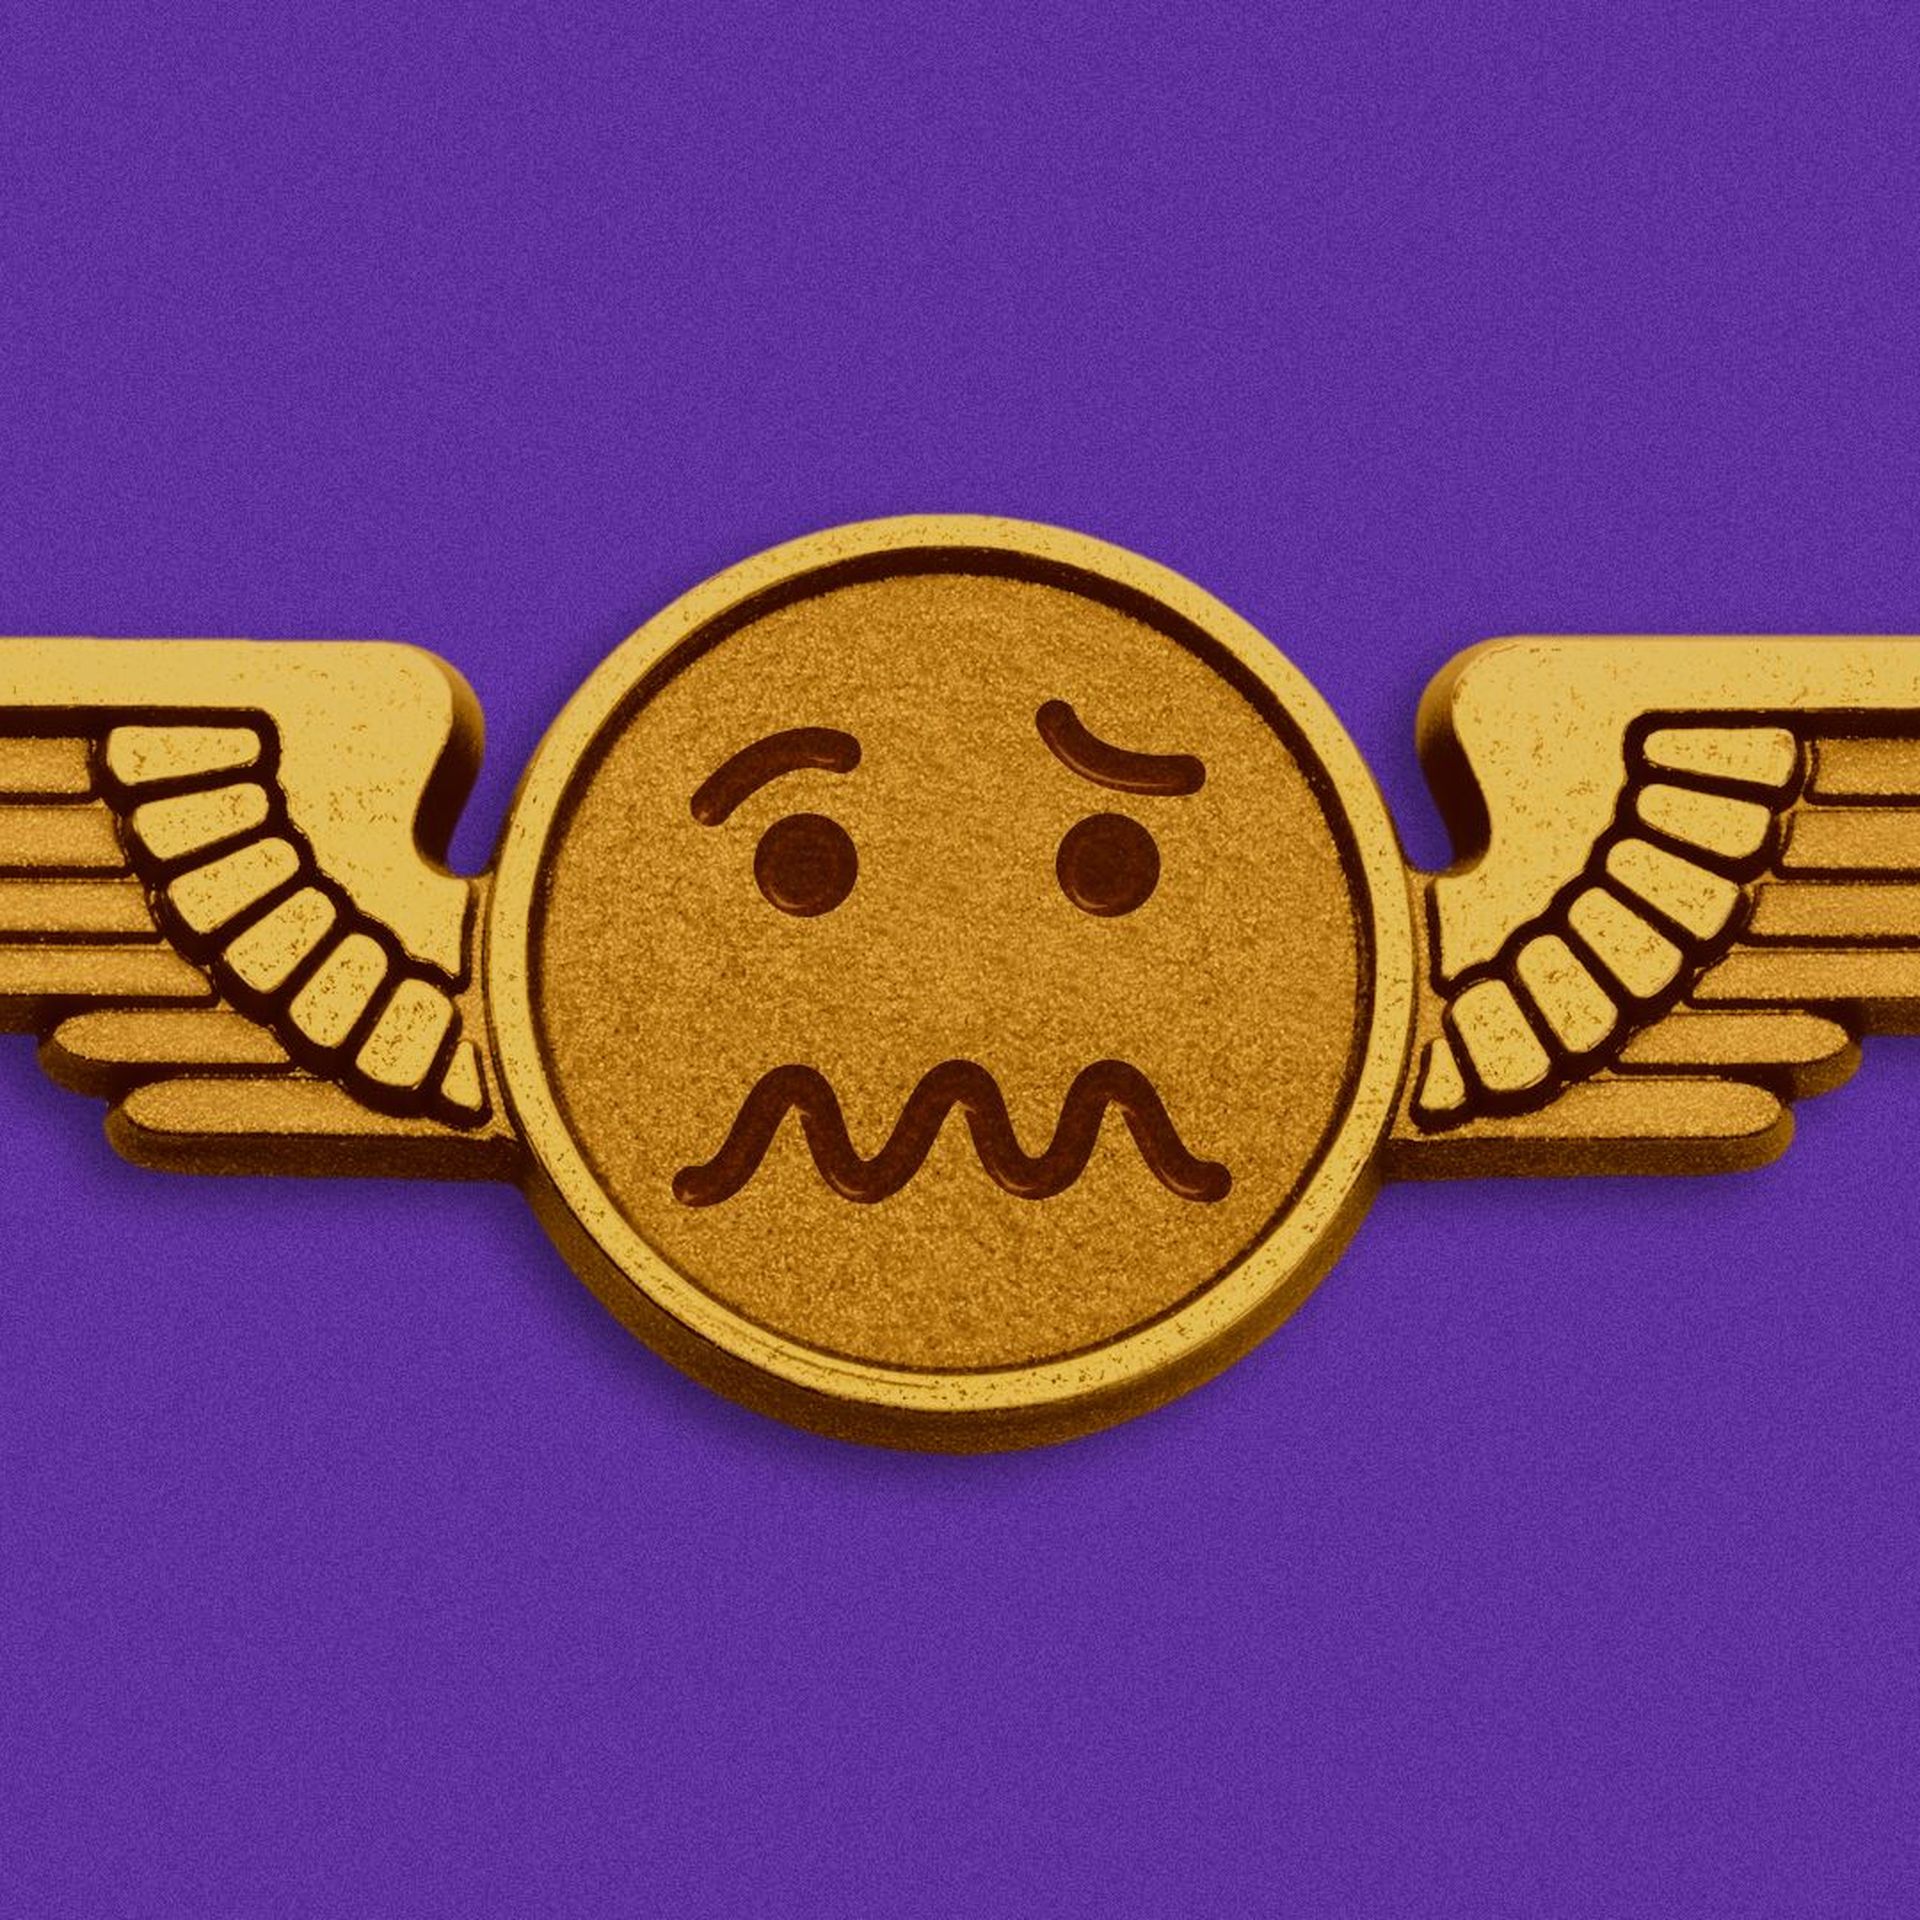 Illustration of a golden airplane wing pin with a woozy or confused emoji.